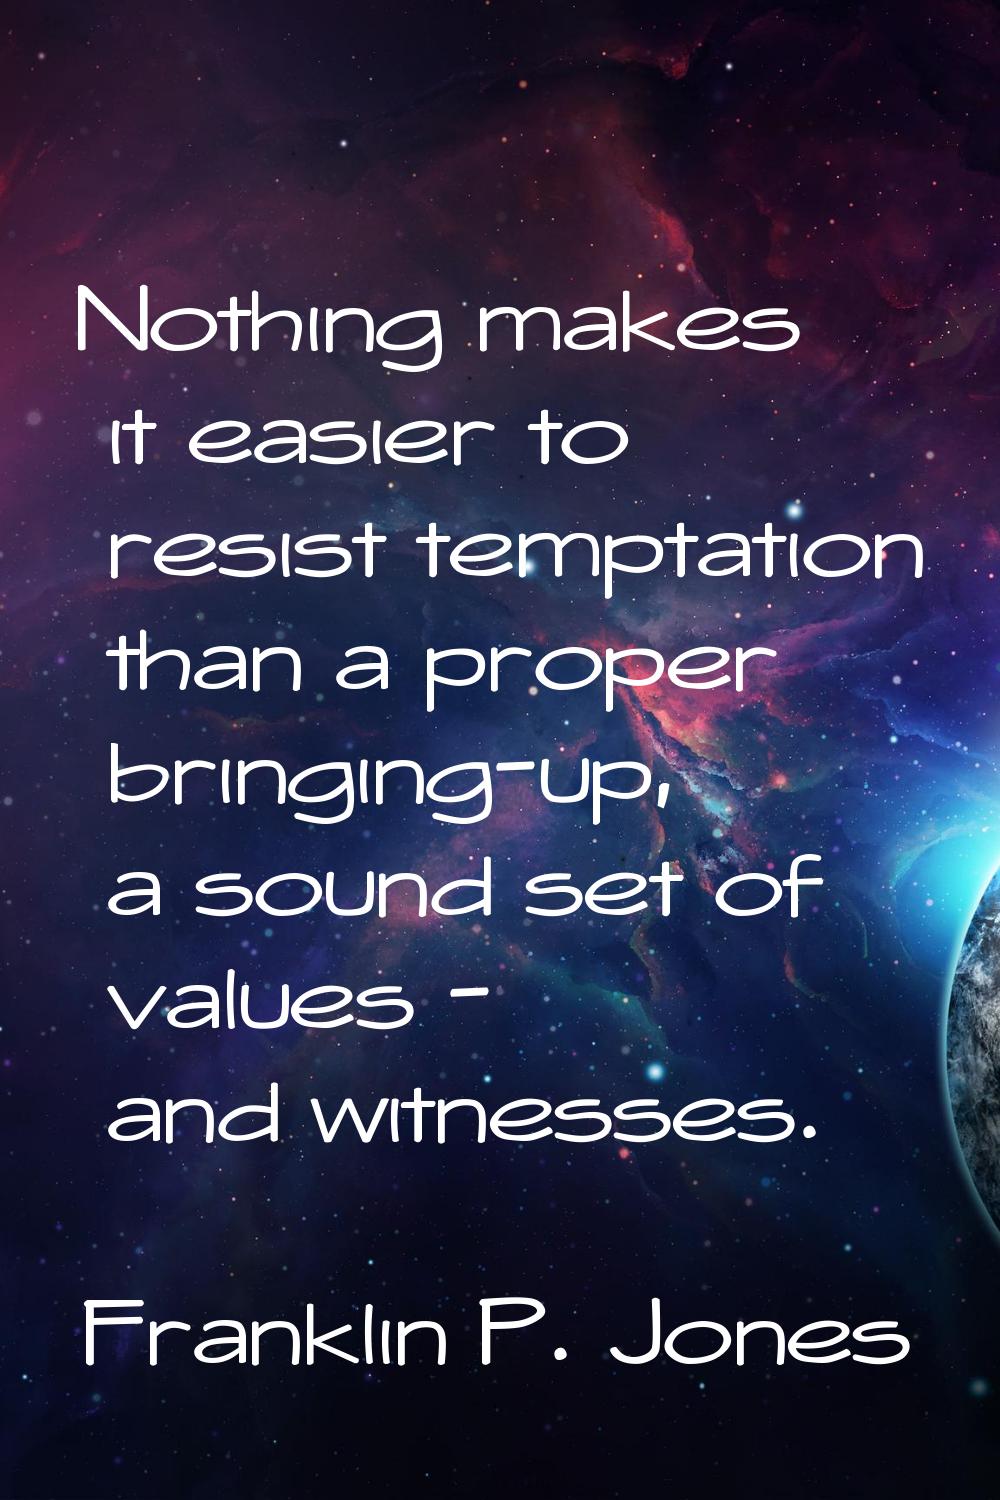 Nothing makes it easier to resist temptation than a proper bringing-up, a sound set of values - and